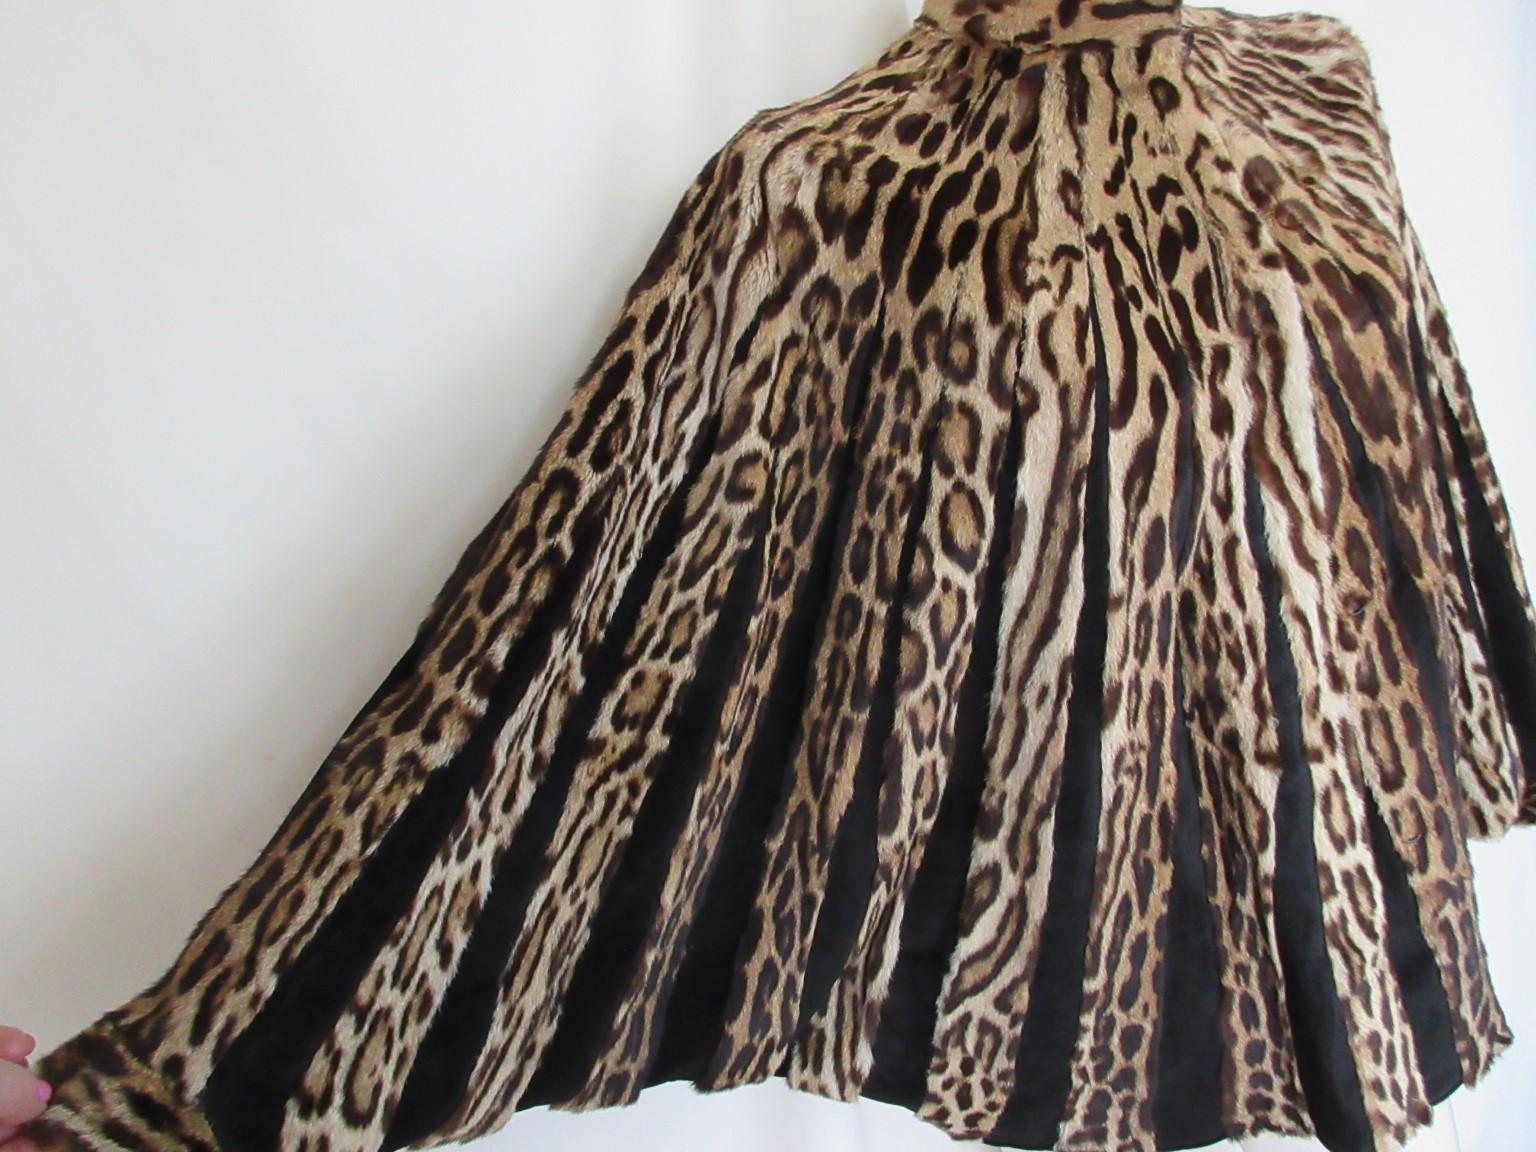 Rare vintage printed ocelot fur jacket 1940's

We offer more luxurious fur coats, view our frontstore

Details:
2 pockets, 1 closing hook at collar
wide sleeves
narrow end at sleeves
3 closing hooks
Black Leather panels
Fully lined
Made circa